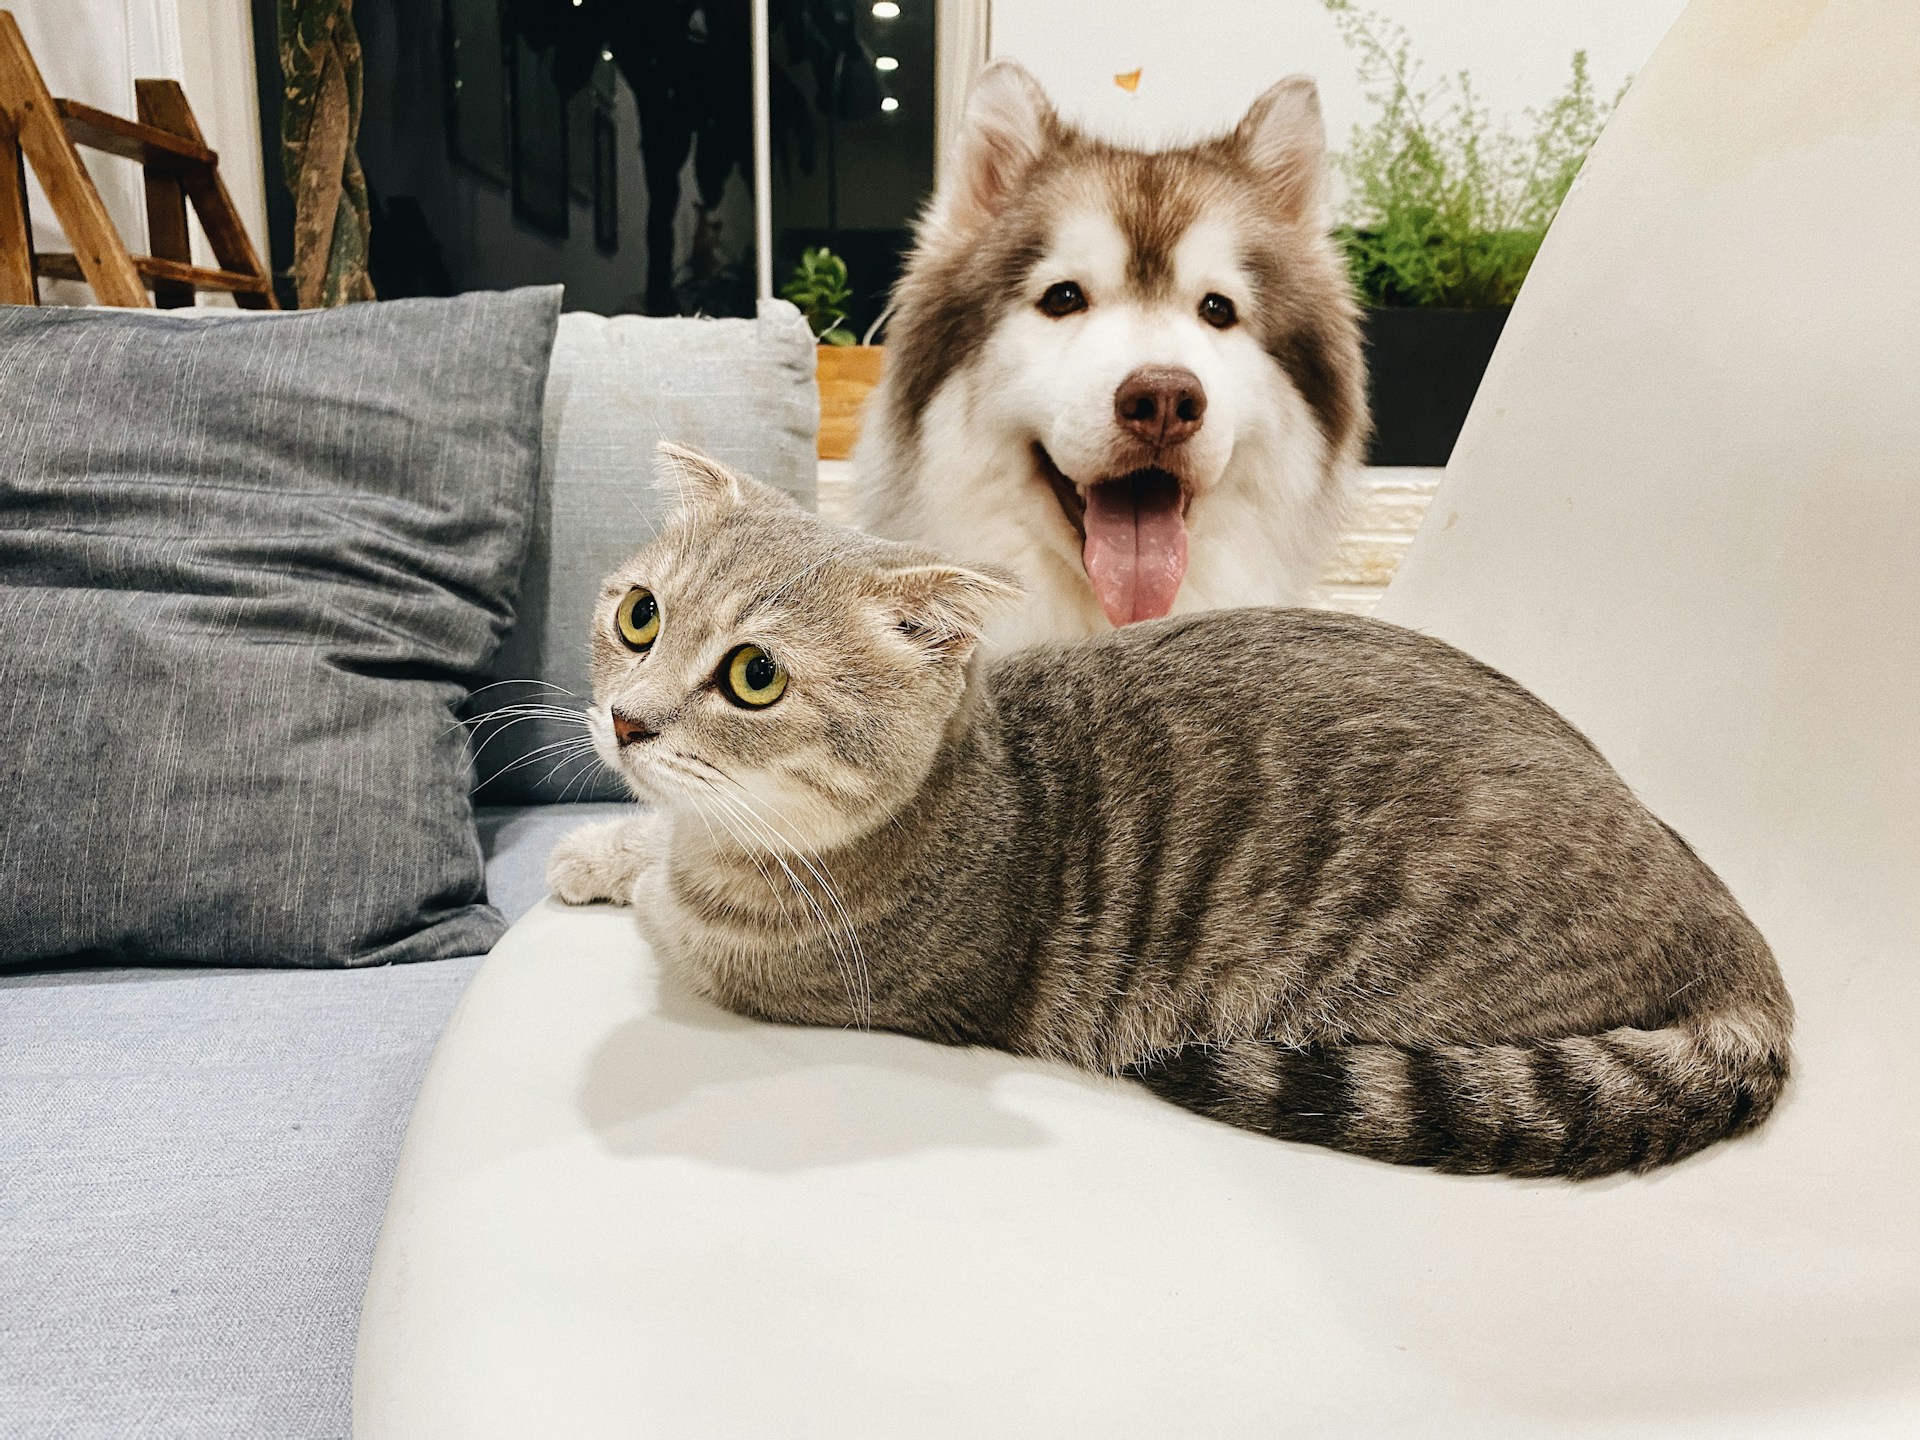 husky sitting on couch with gray tabby cat